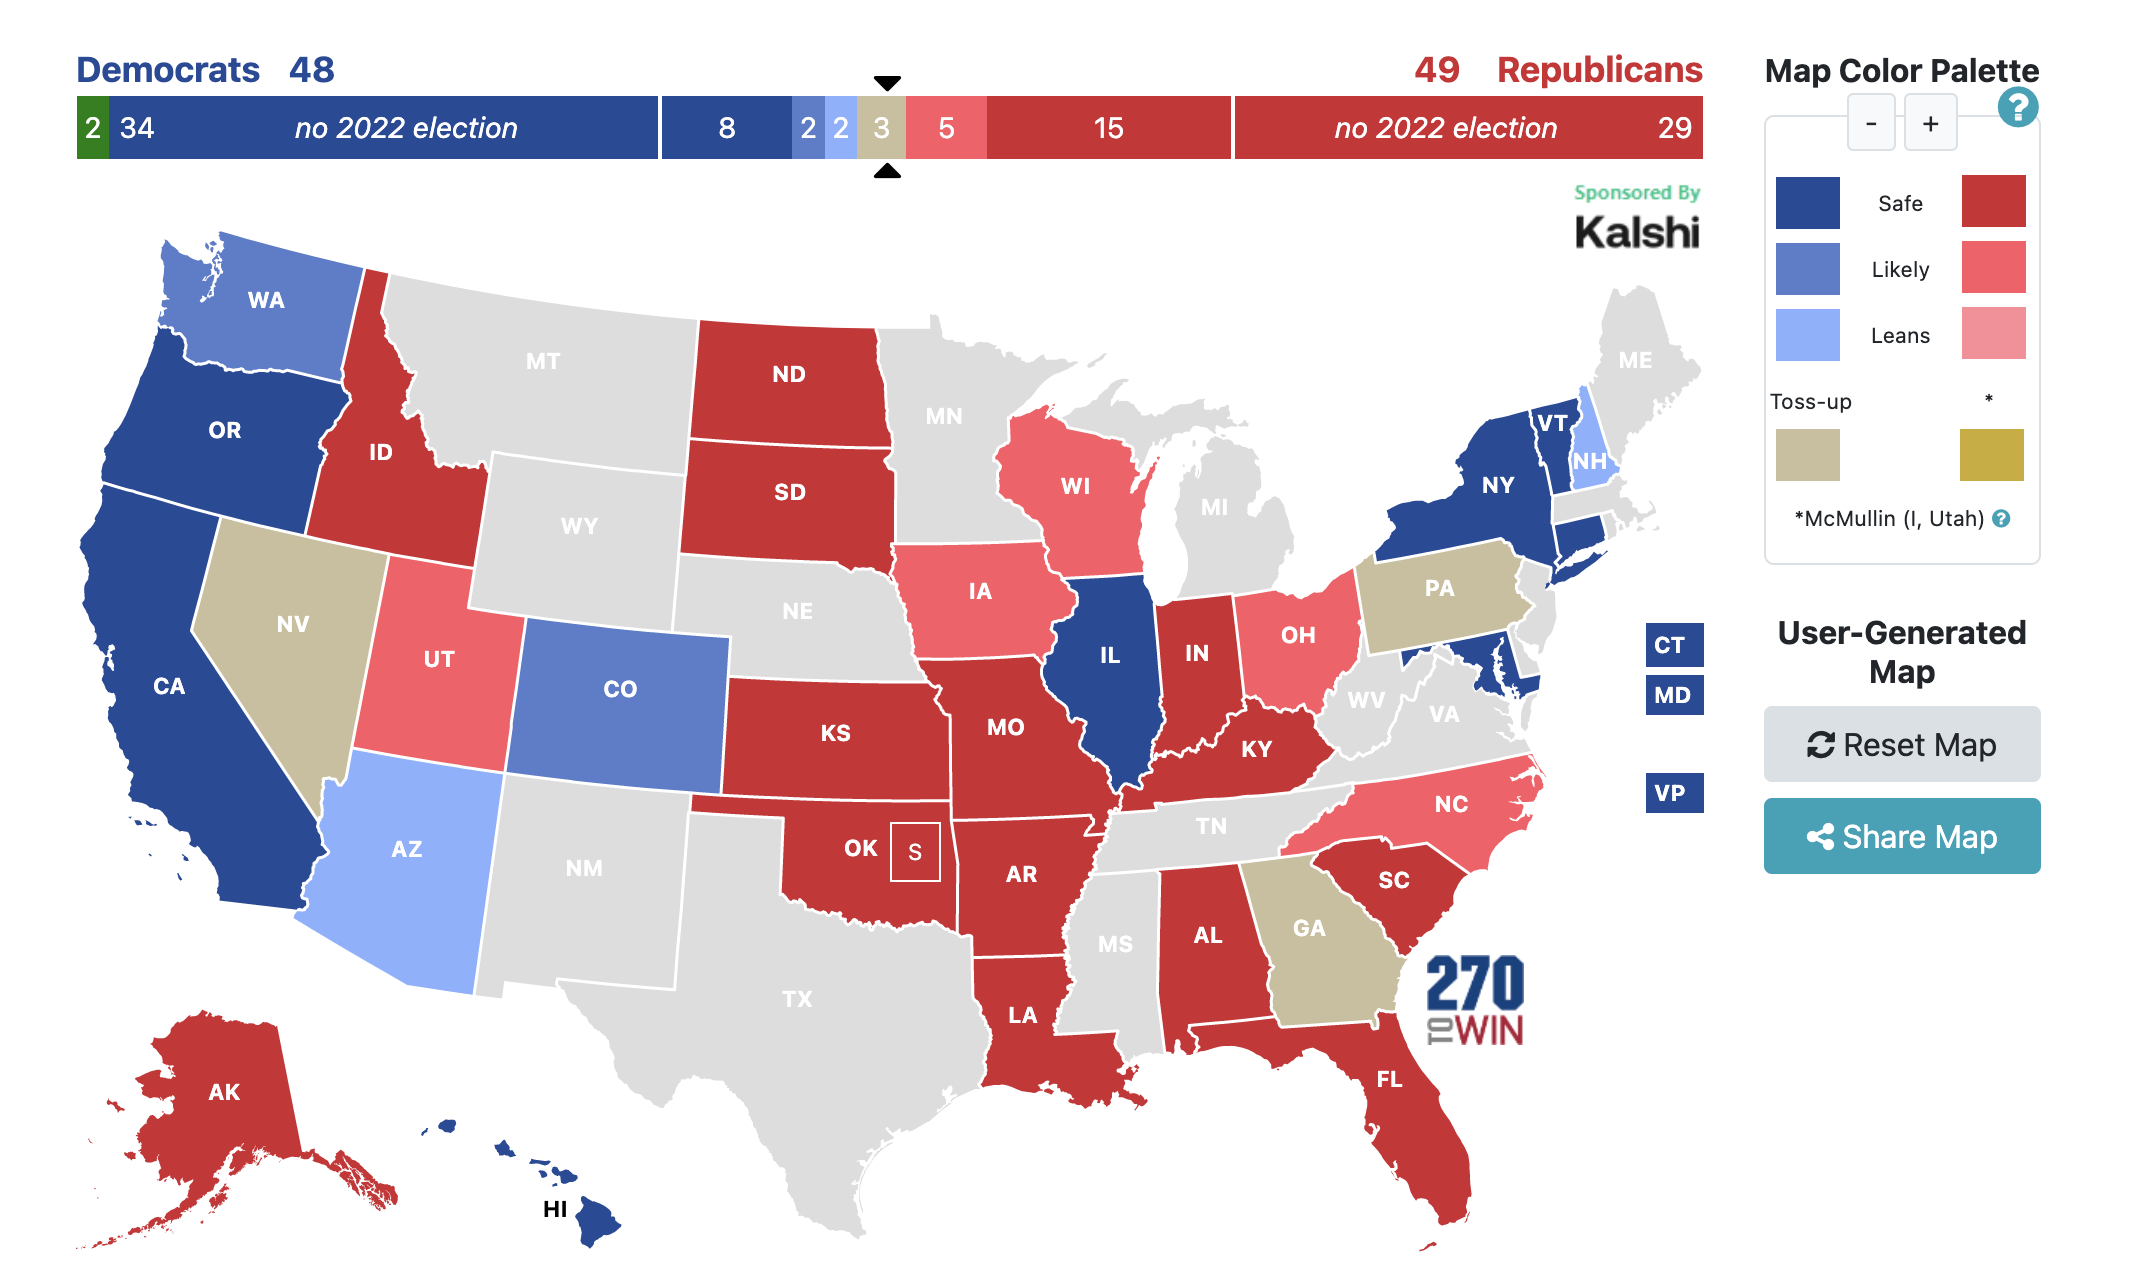 My "6 days out" predictions for the 2022 US midterm elections